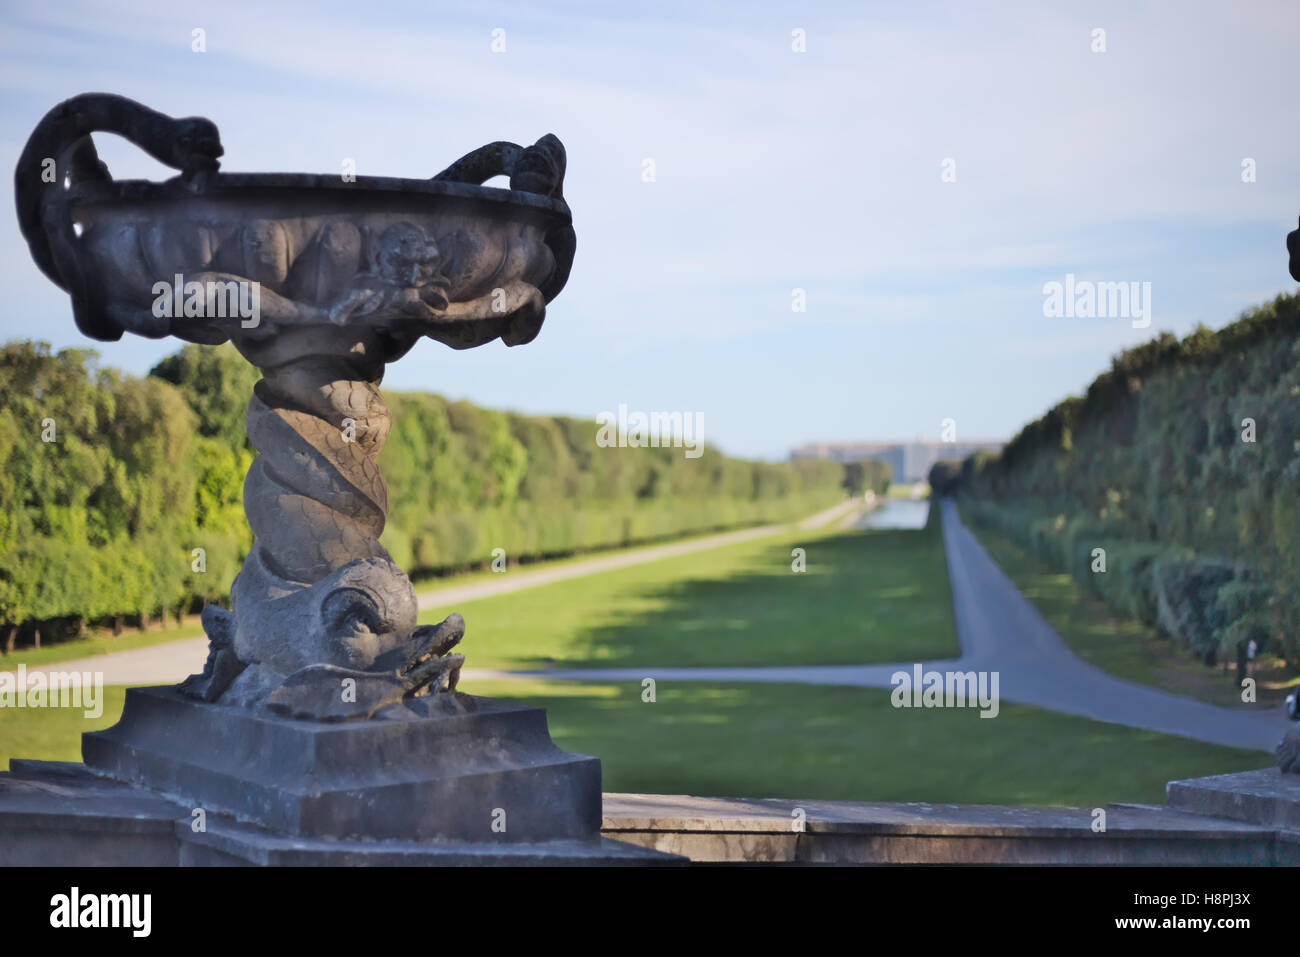 Detail of marble sculpture. Royal Palace of Caserta (Park) on the background Stock Photo